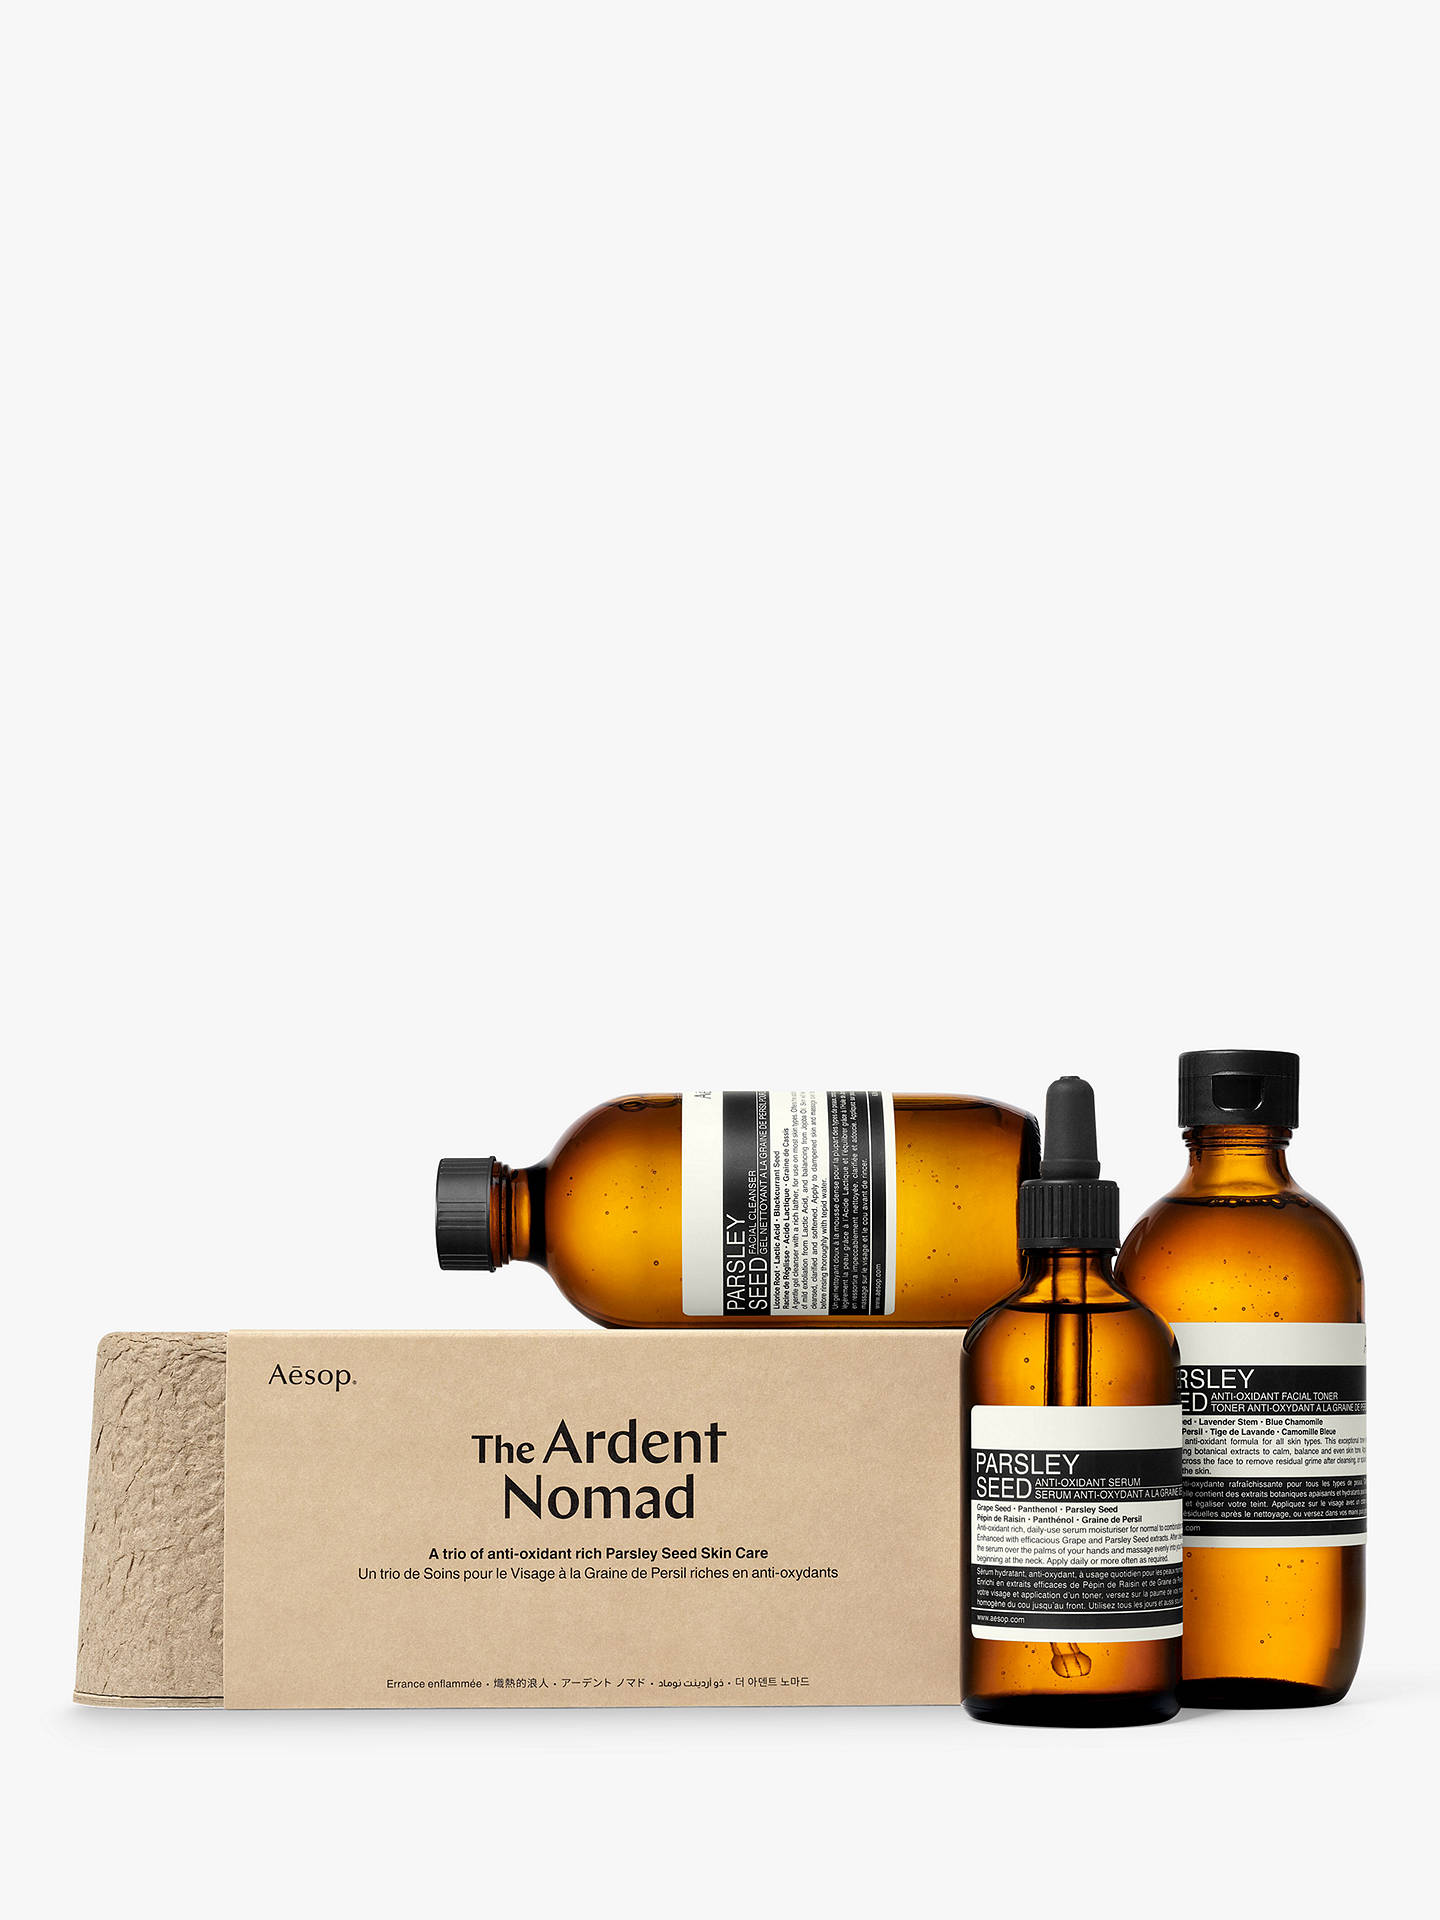 Aesop The Ardent Nomad Skincare Gift Set at John Lewis